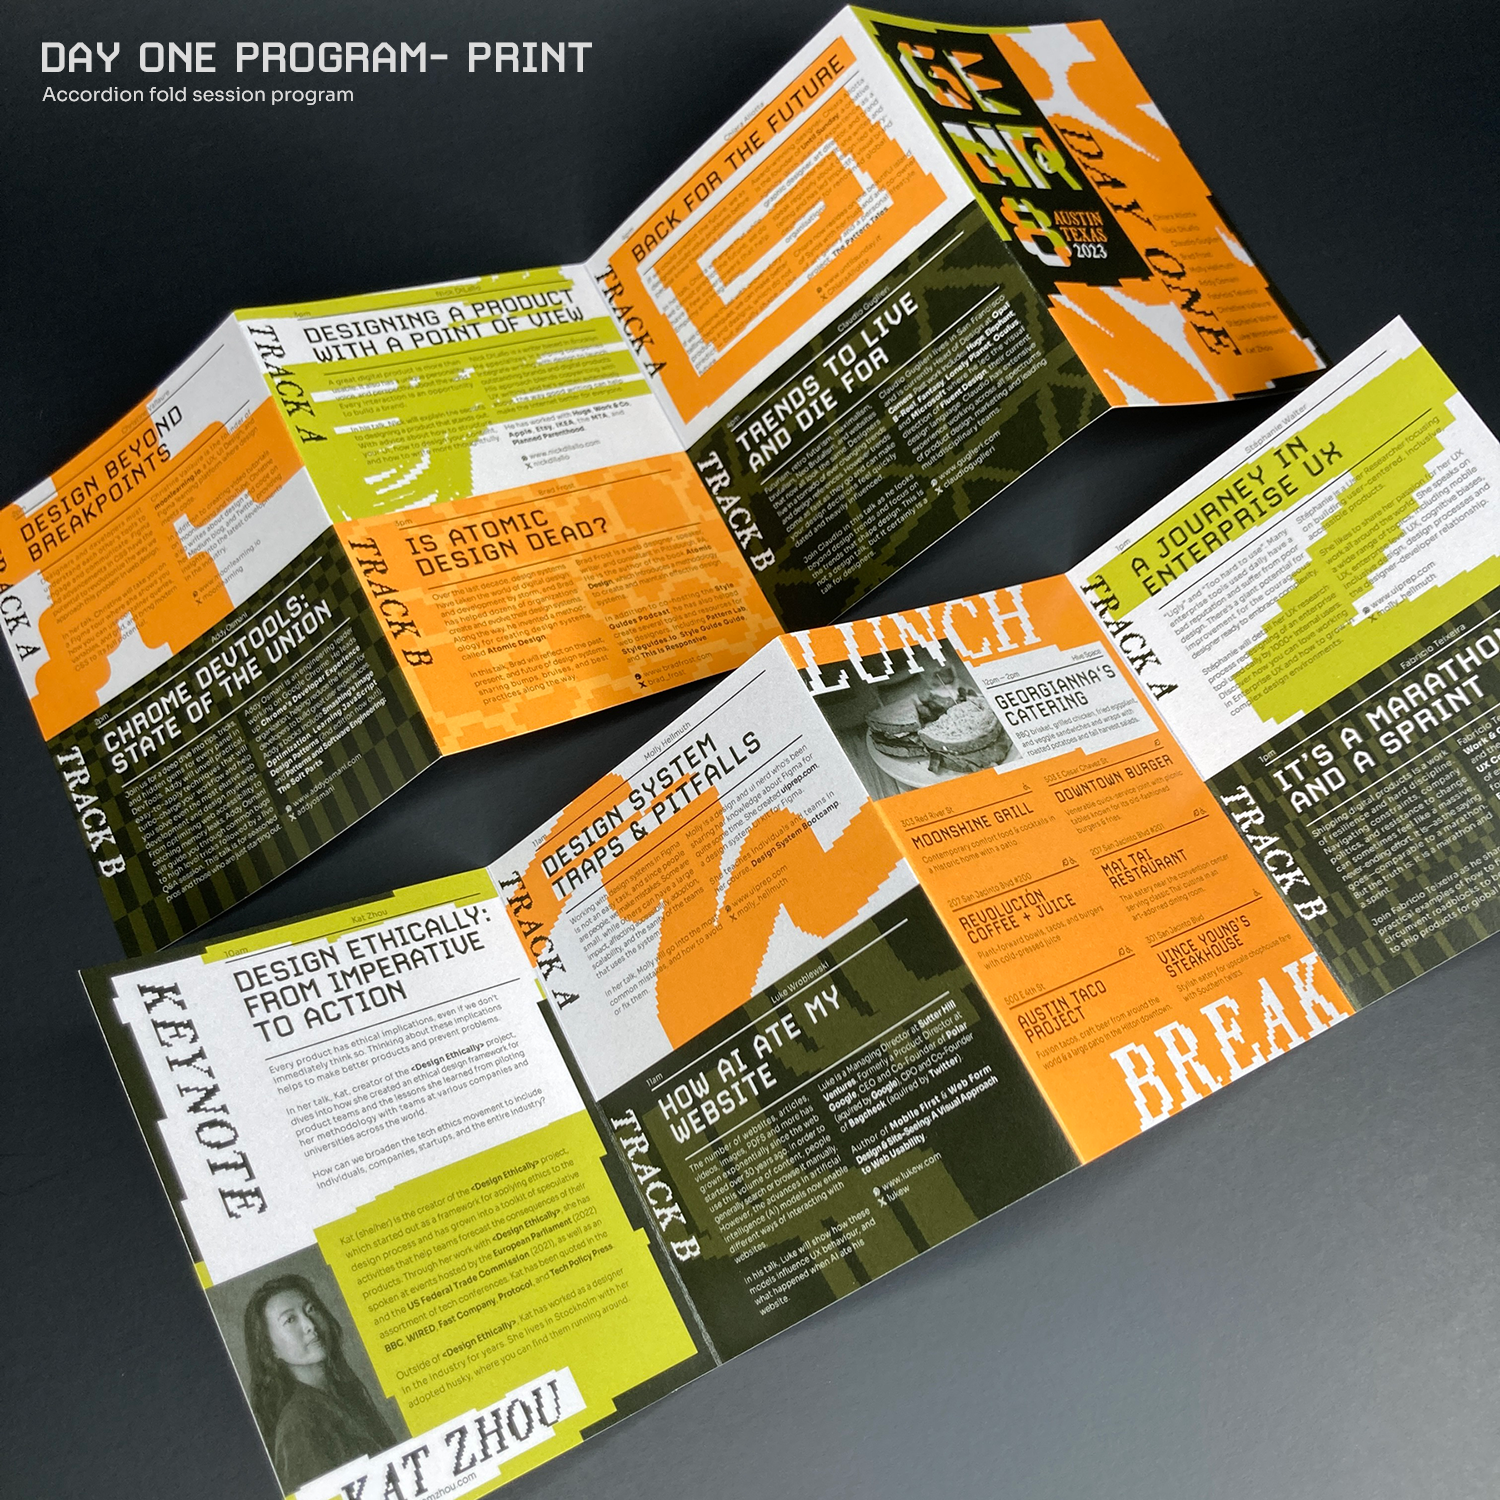 Day One Program- print example, front and back (both sides), on a black backdrop